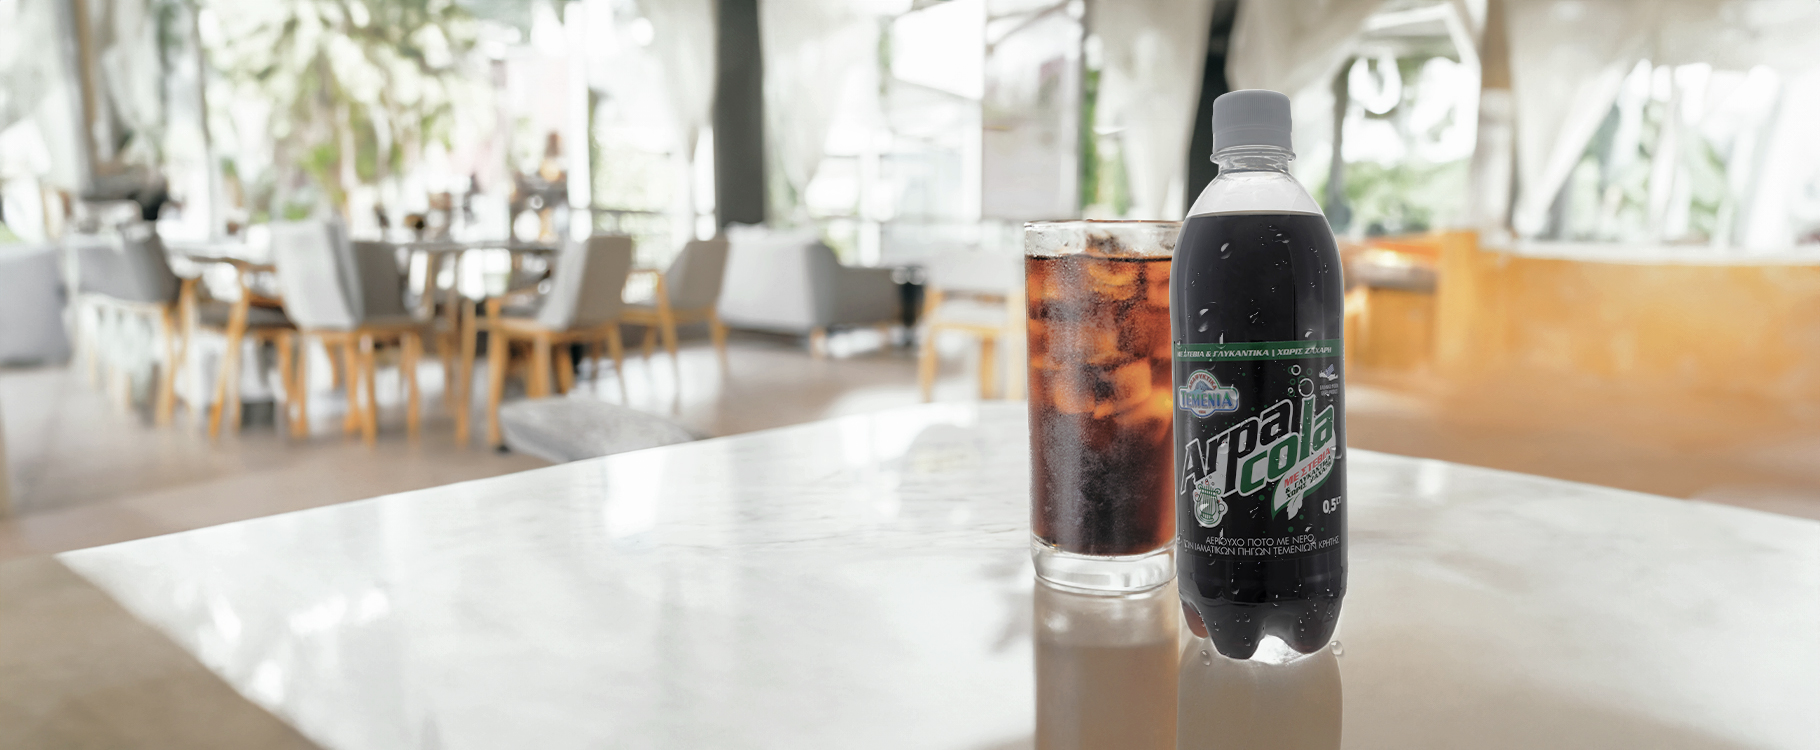 COLA Sugar-freewith Stevia, enjoymentwithout compromise.